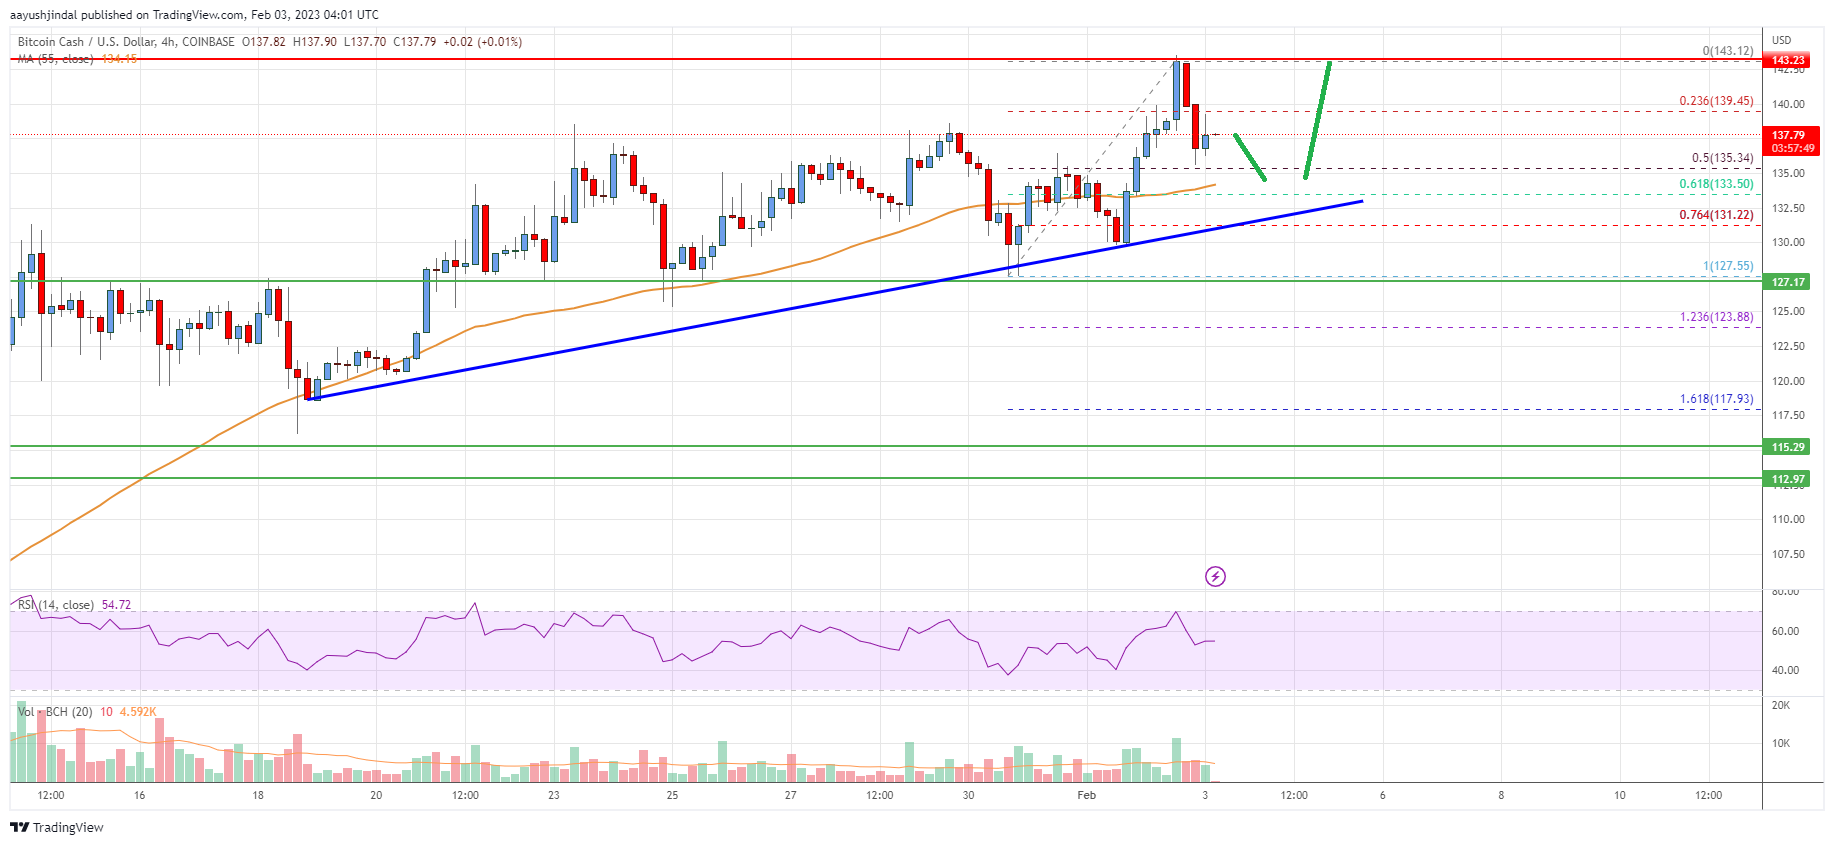 Bitcoin Cash Analysis: Increase To $160 Seems Likely